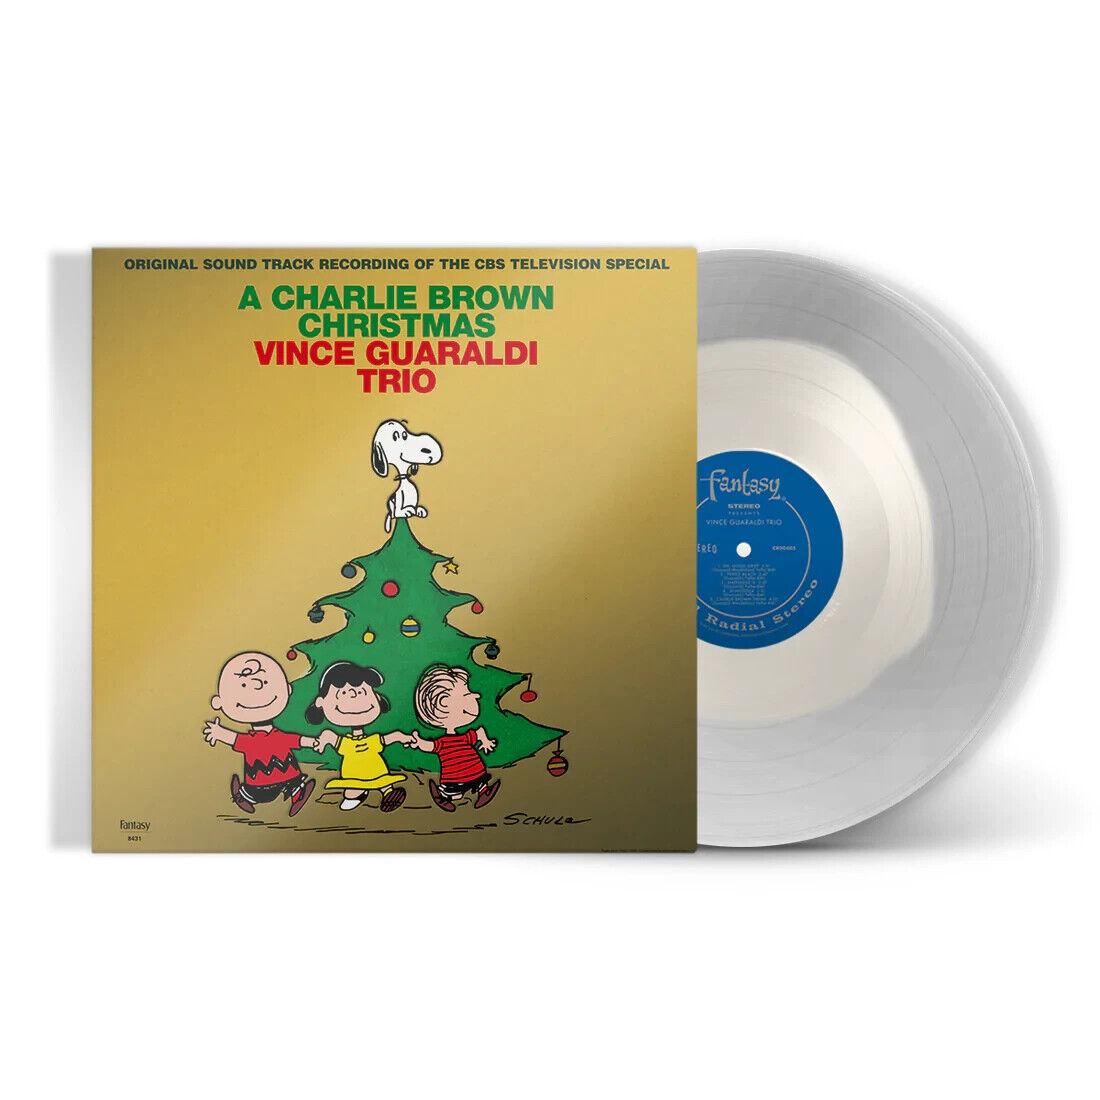 A CHARLIE BROWN CHRISTMAS VINYL NEW LIMITED TO 750 SKATING POND LP PEANUTS